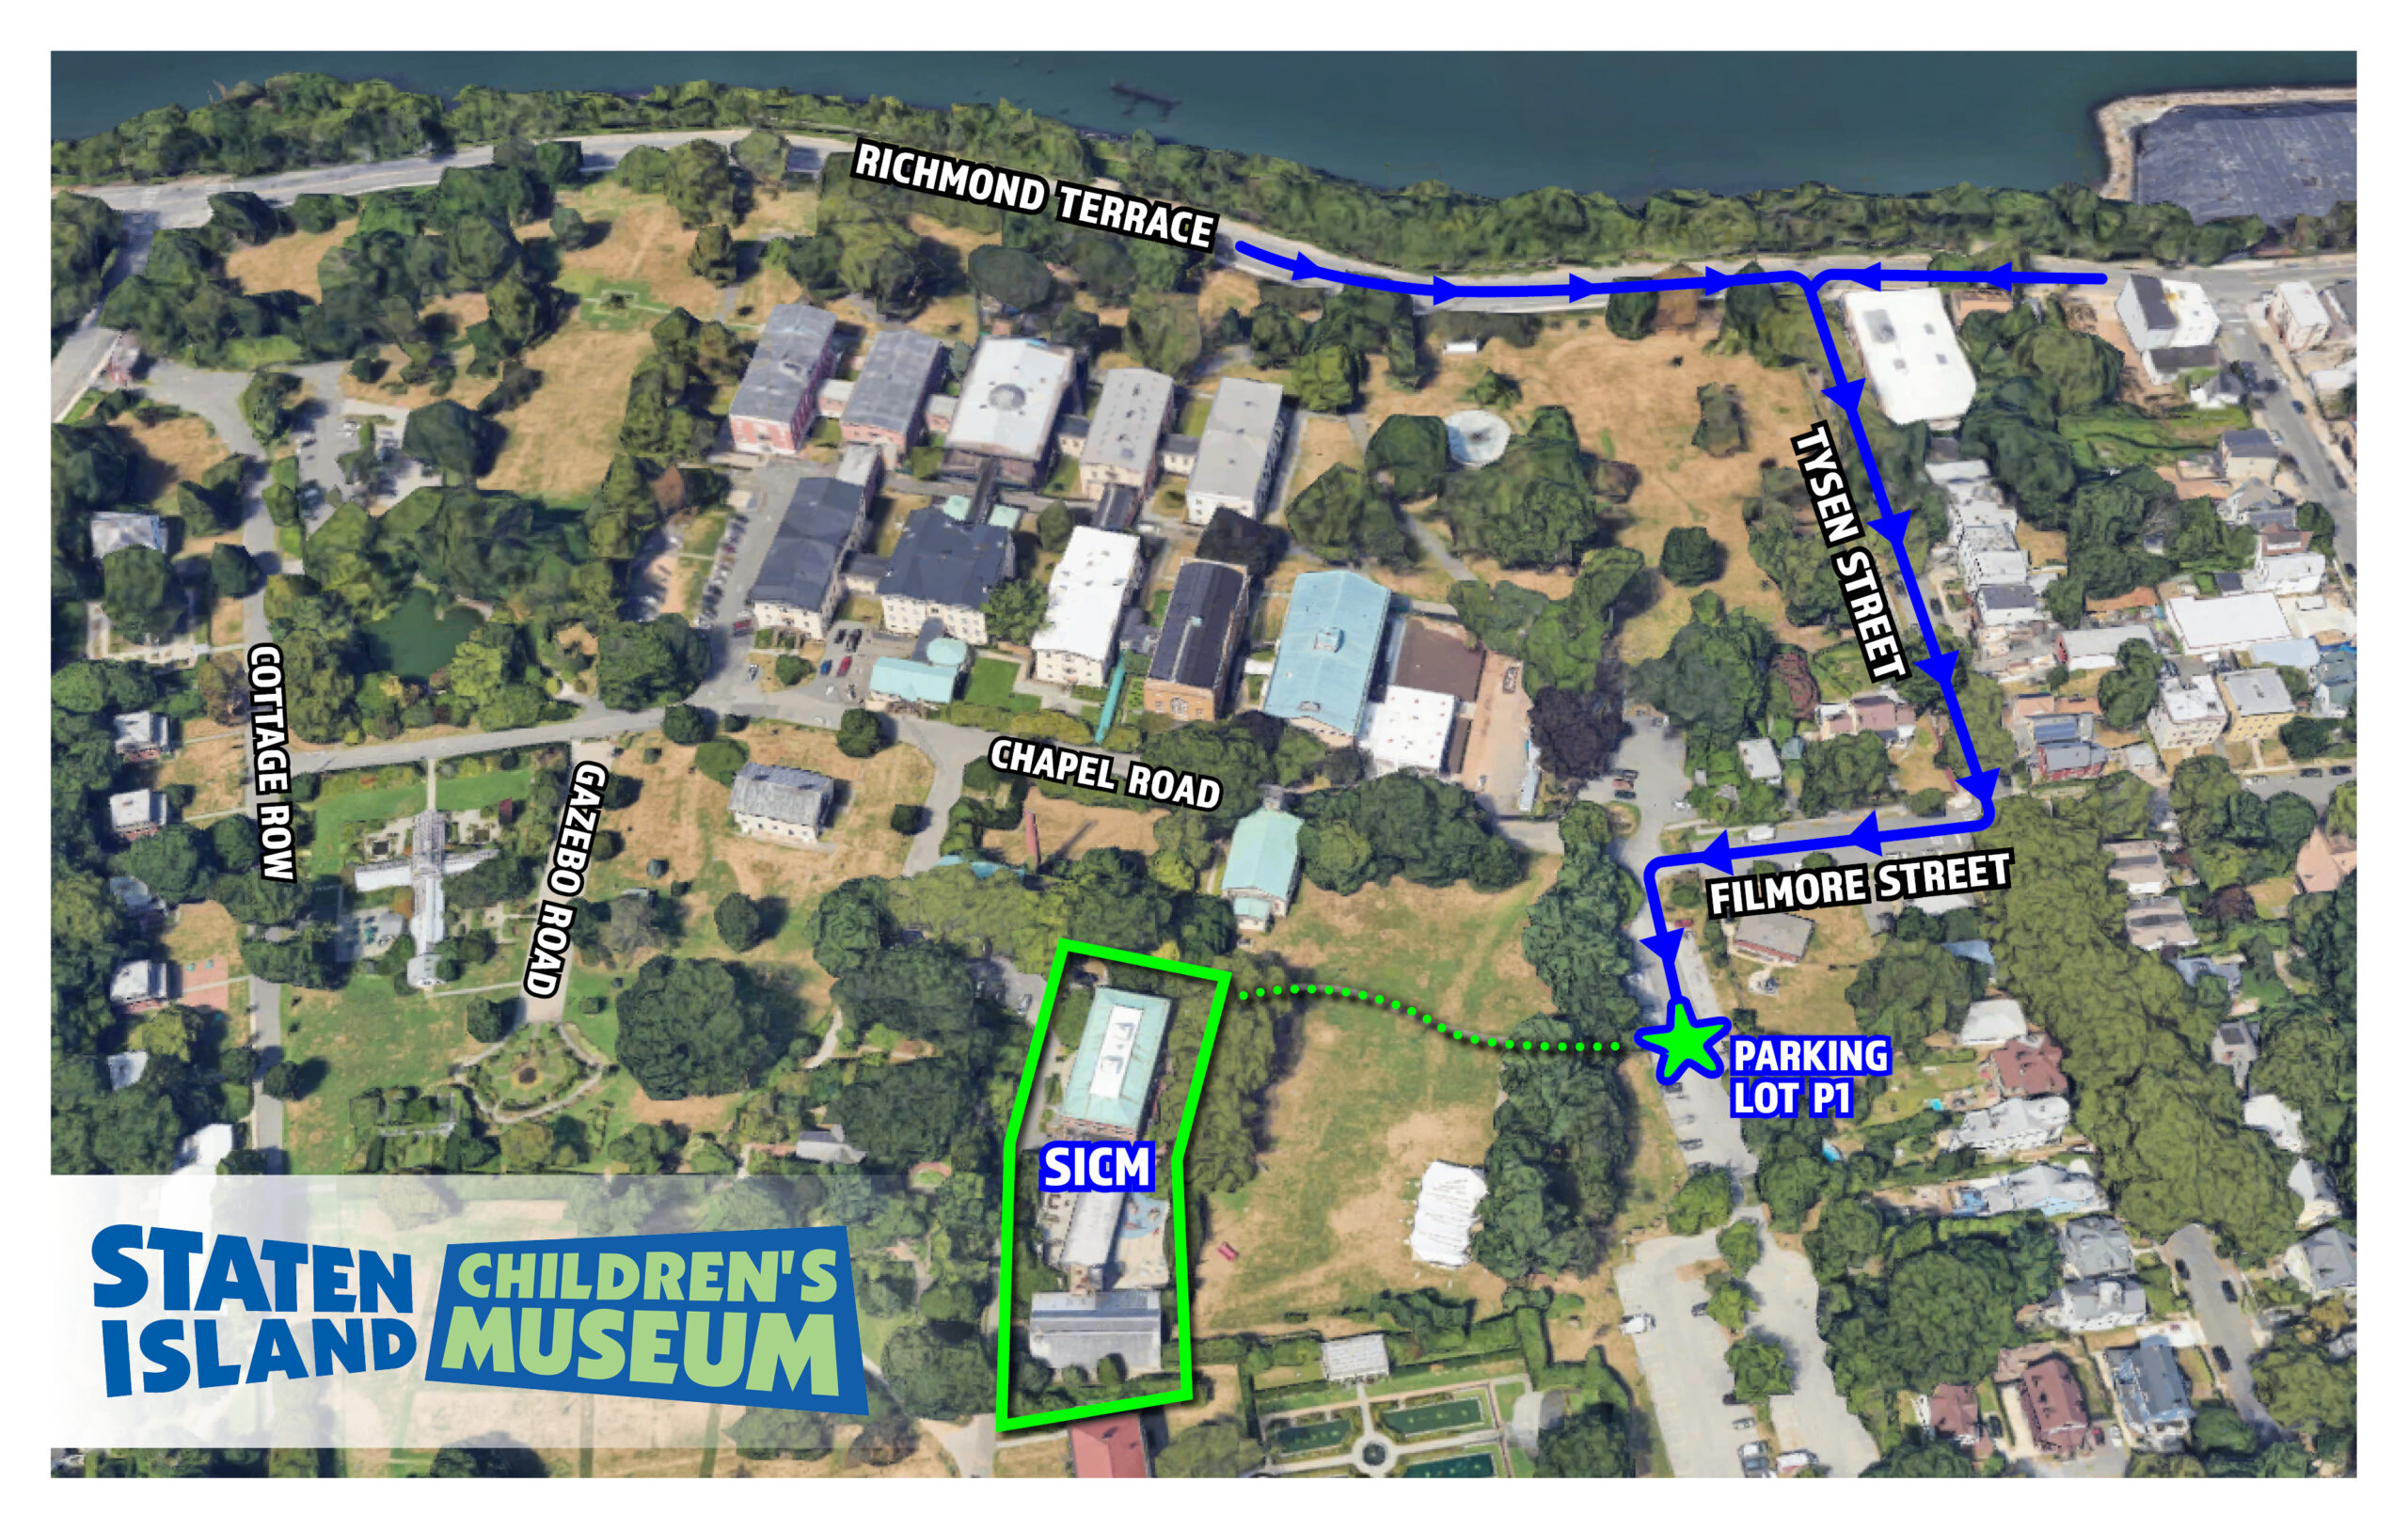 An aerial image of the campus of Snug Harbor with bright lines directing the viewer along Richmond Terrace to turn onto Tysen St., then right onto Fillmore St. the left into Parking Lot P1. After parking follow the stone path to the Children's Museum